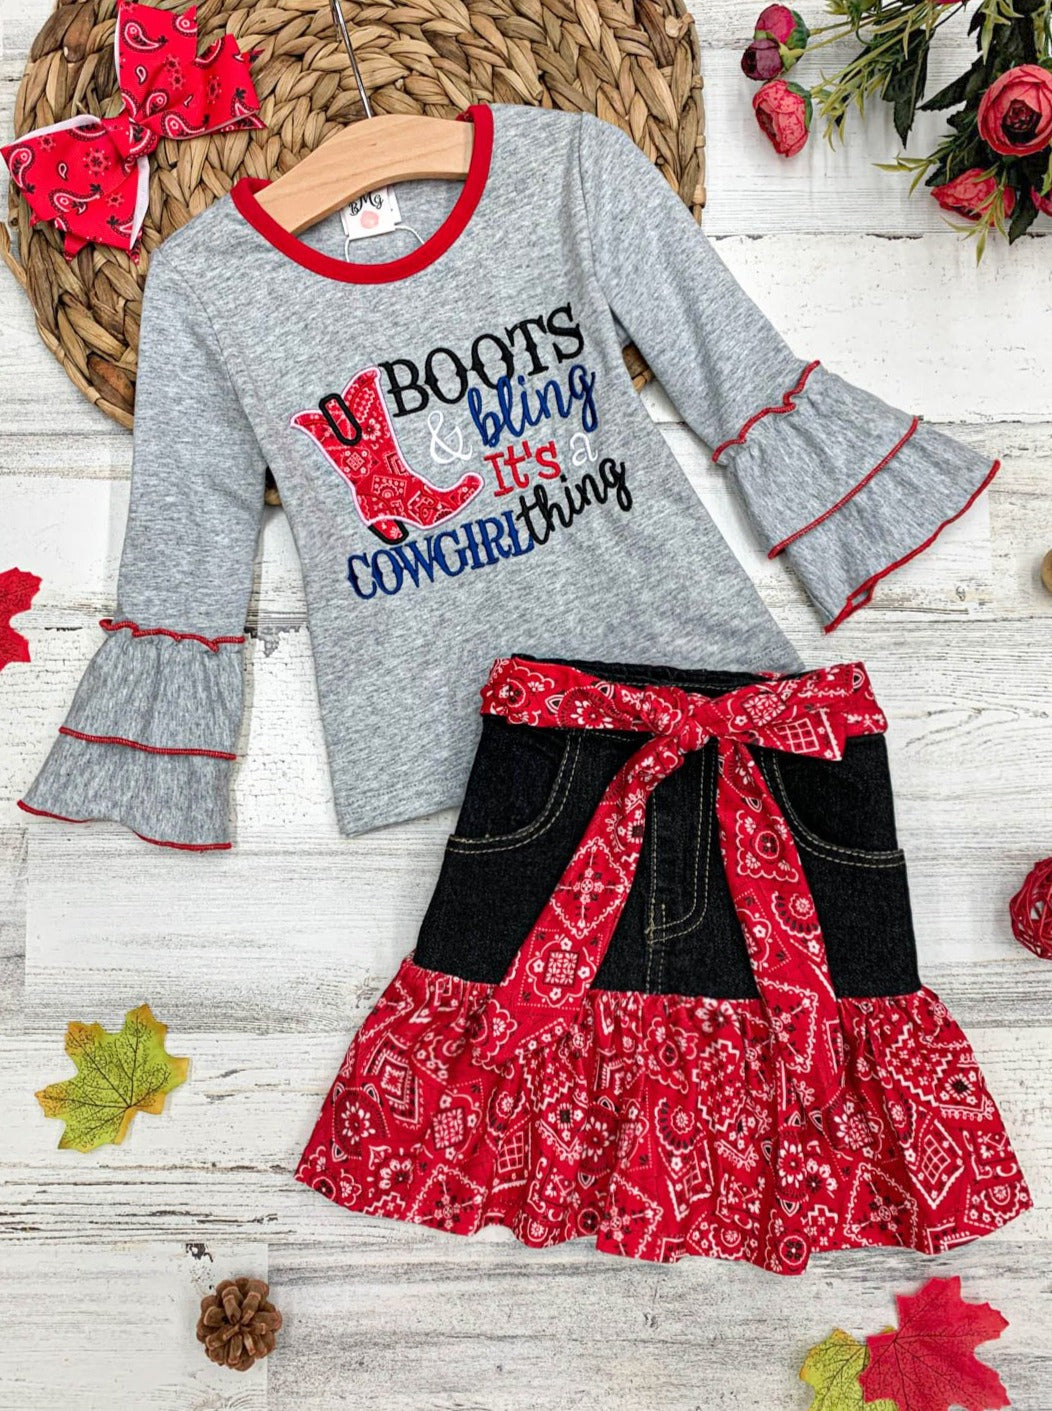 Girls "Boots Bling, It's a Cowgirl Thing" Top and Paisley Ruffled Denim Skirt Set